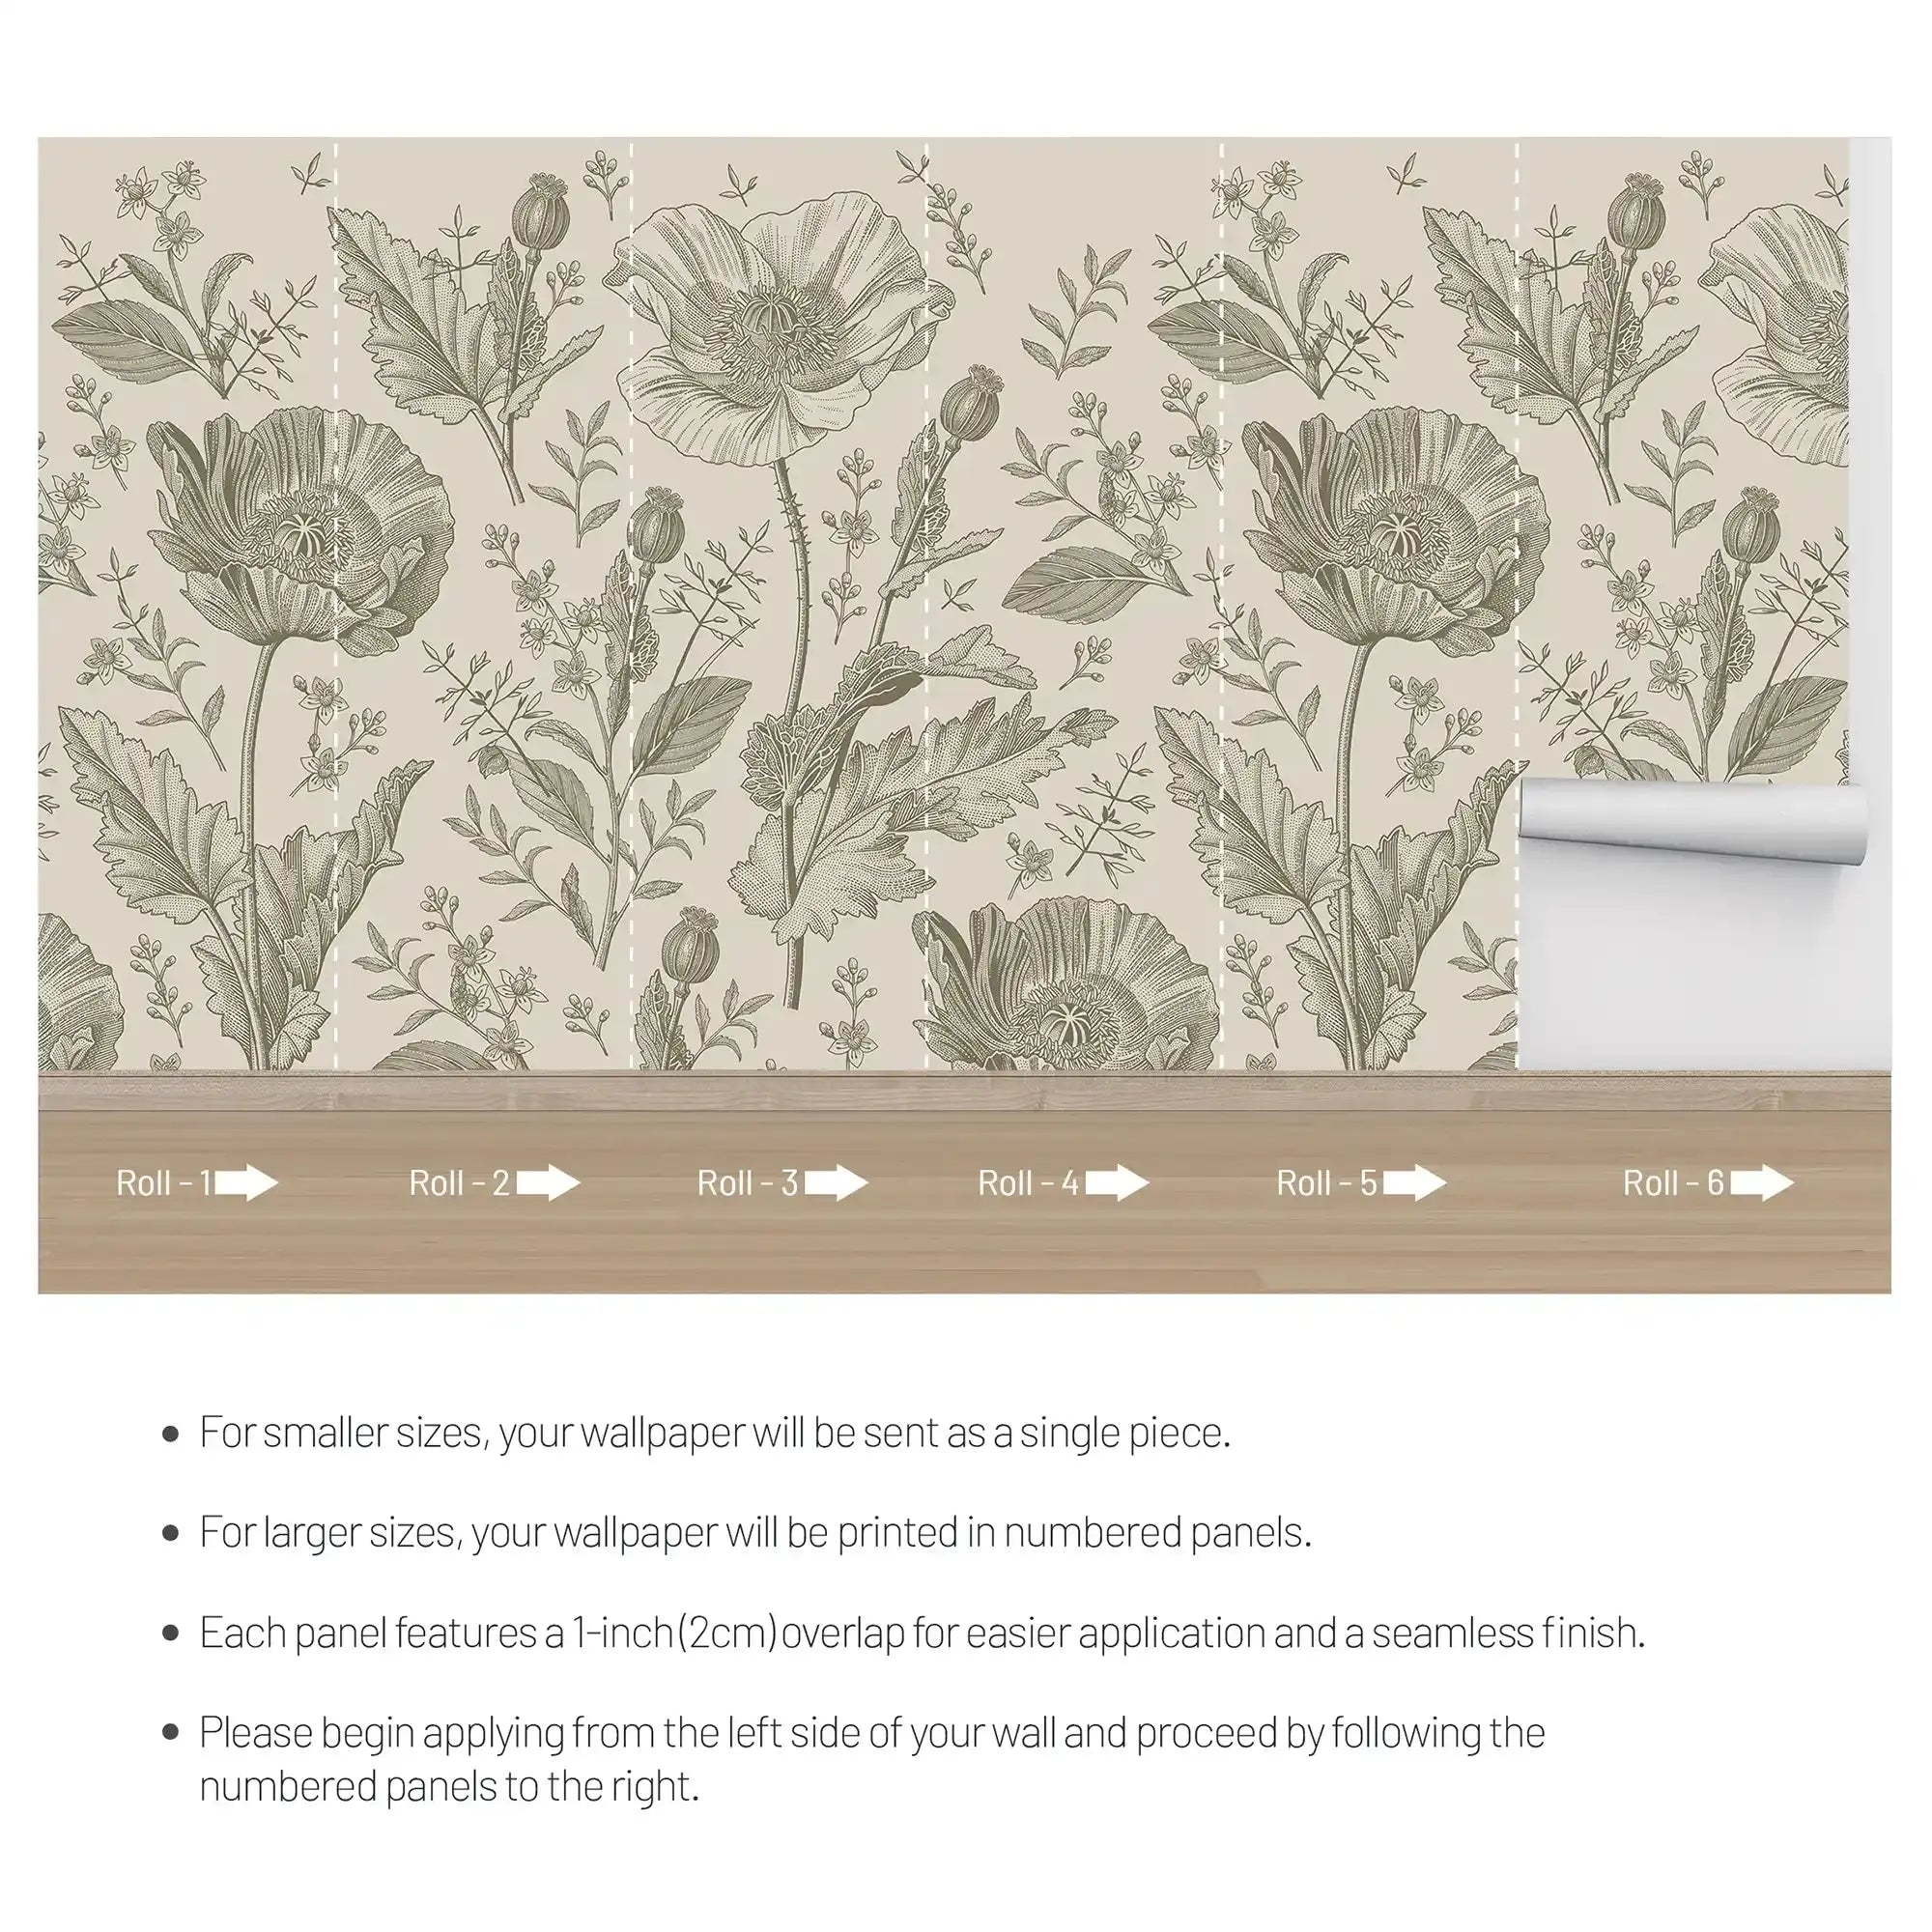 3093-A / Floral Wall Mural: Self Adhesive, Removable Wallpaper for Modern and Boho Decor - Artevella